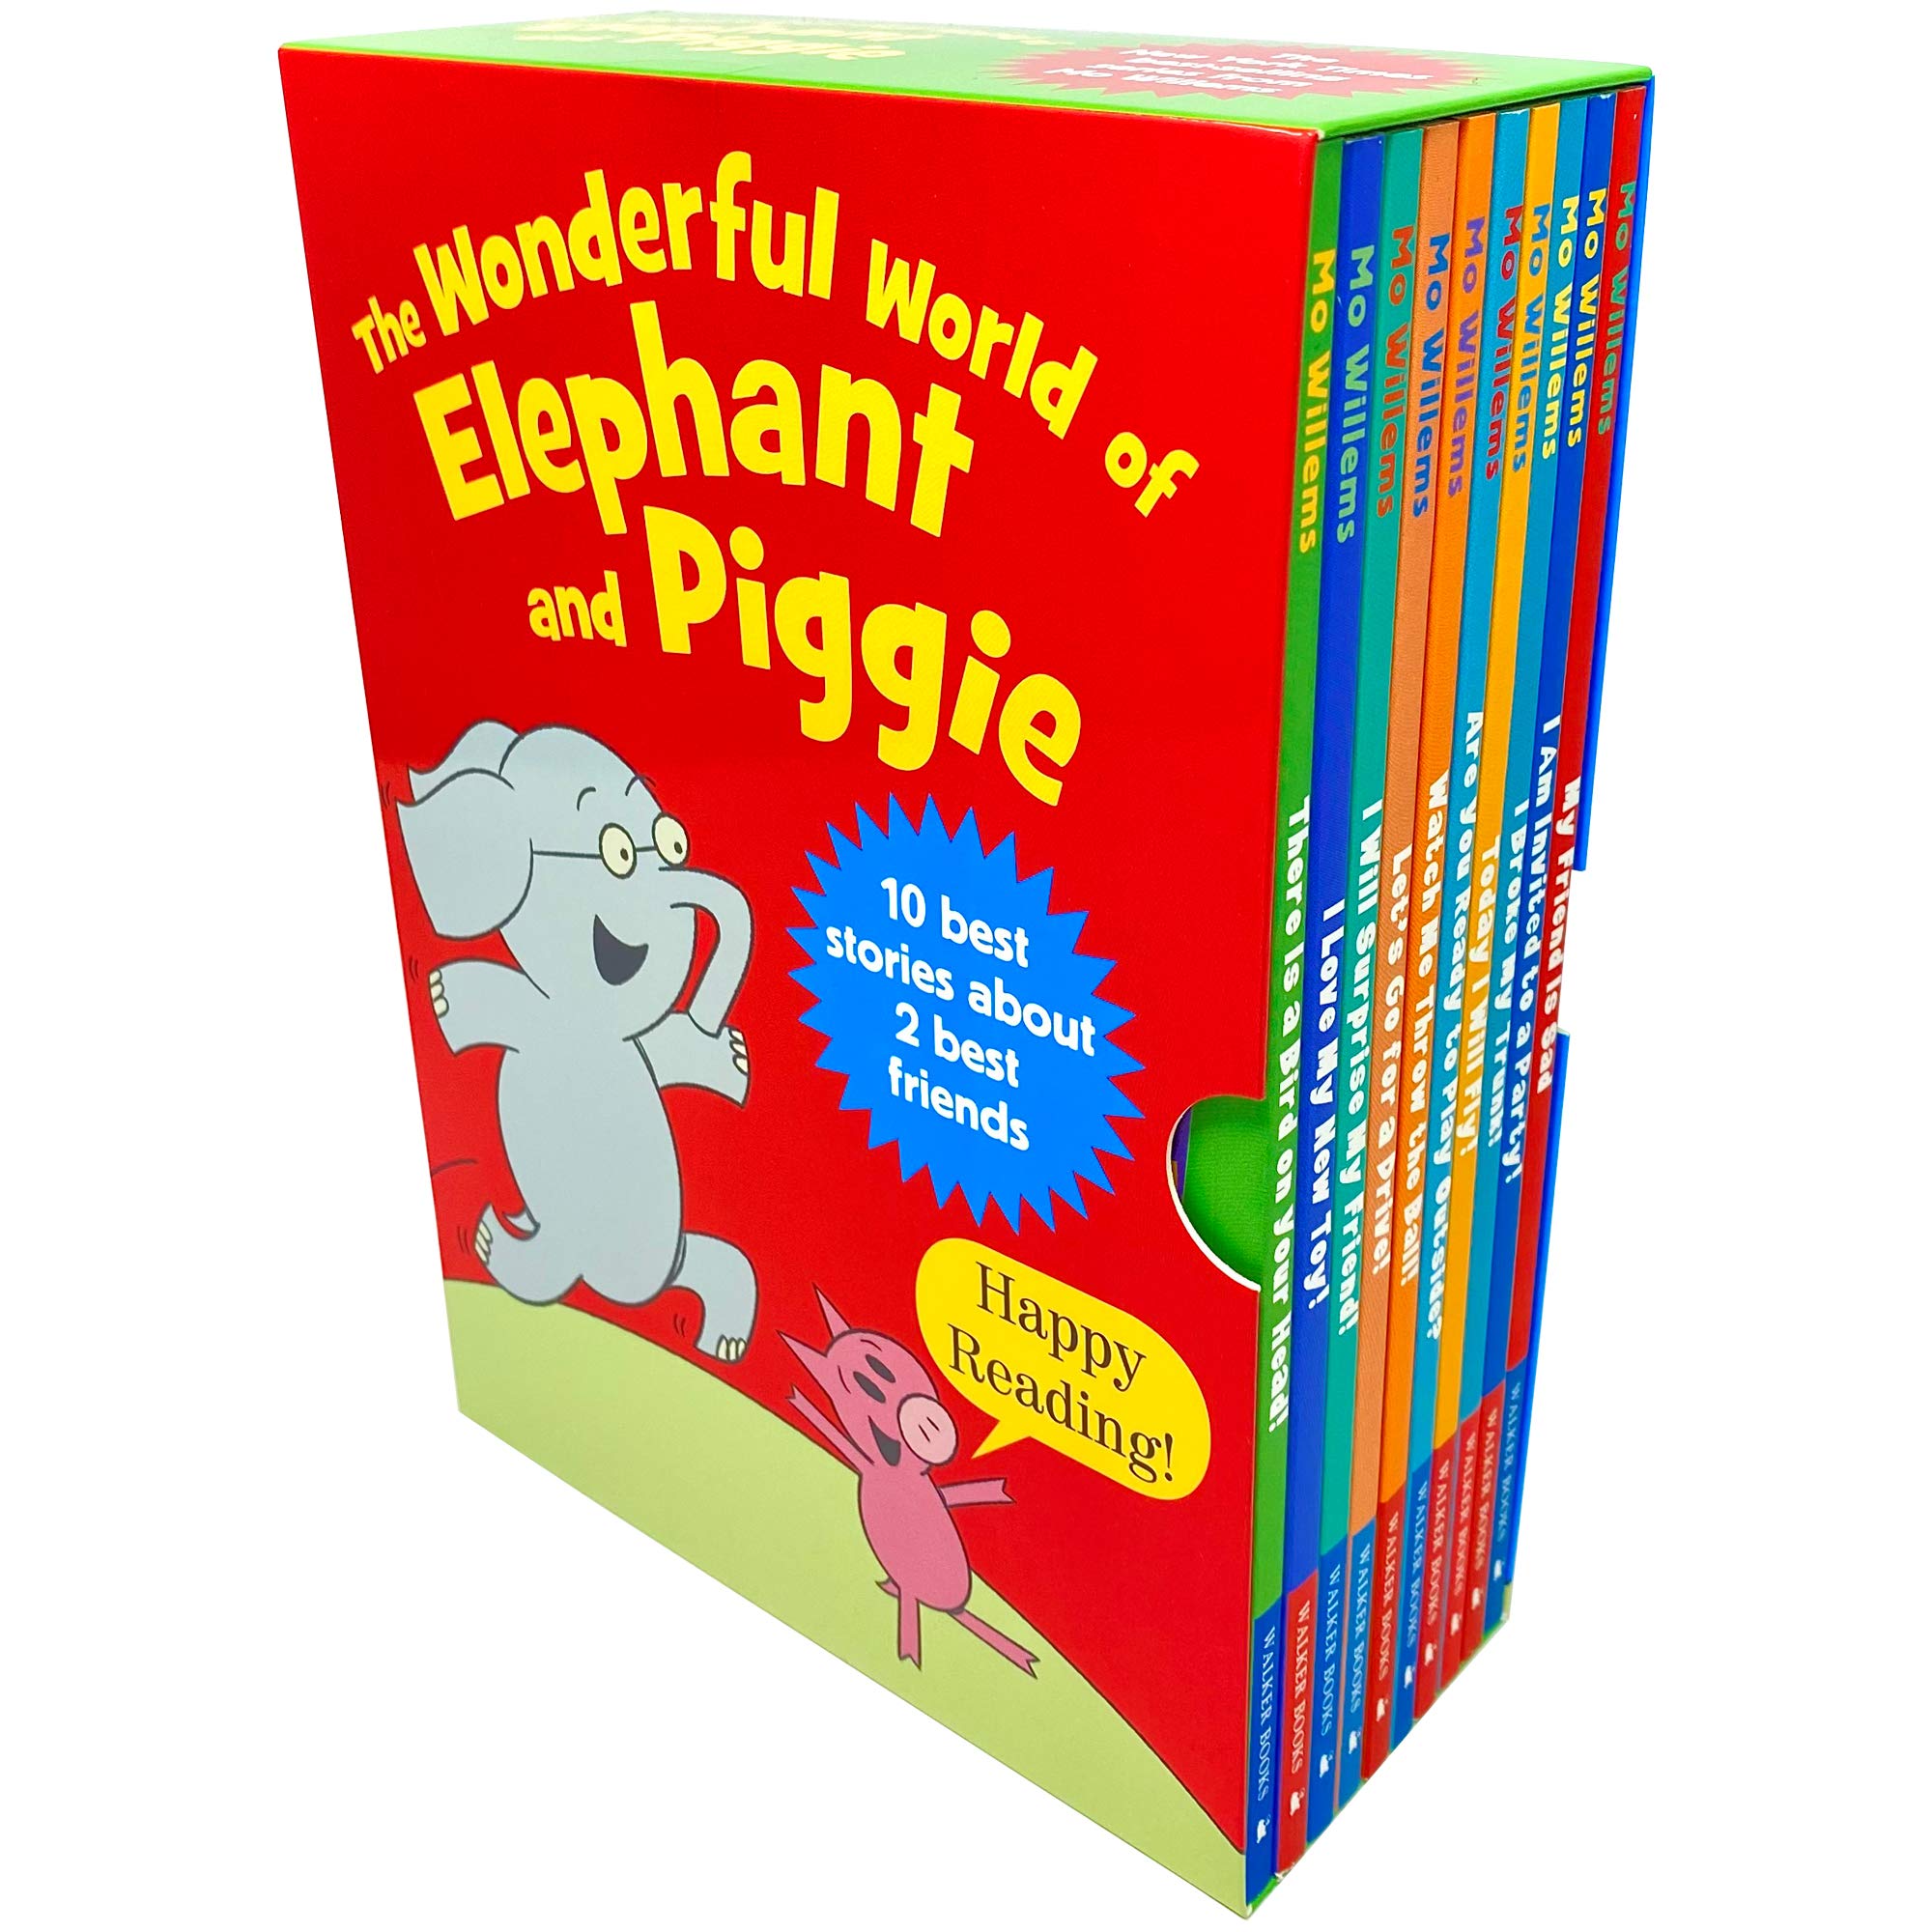 The Wonderful World of Elephant & Piggie 10 Books Collection Box Set by Mo Willems - Lets Buy Books